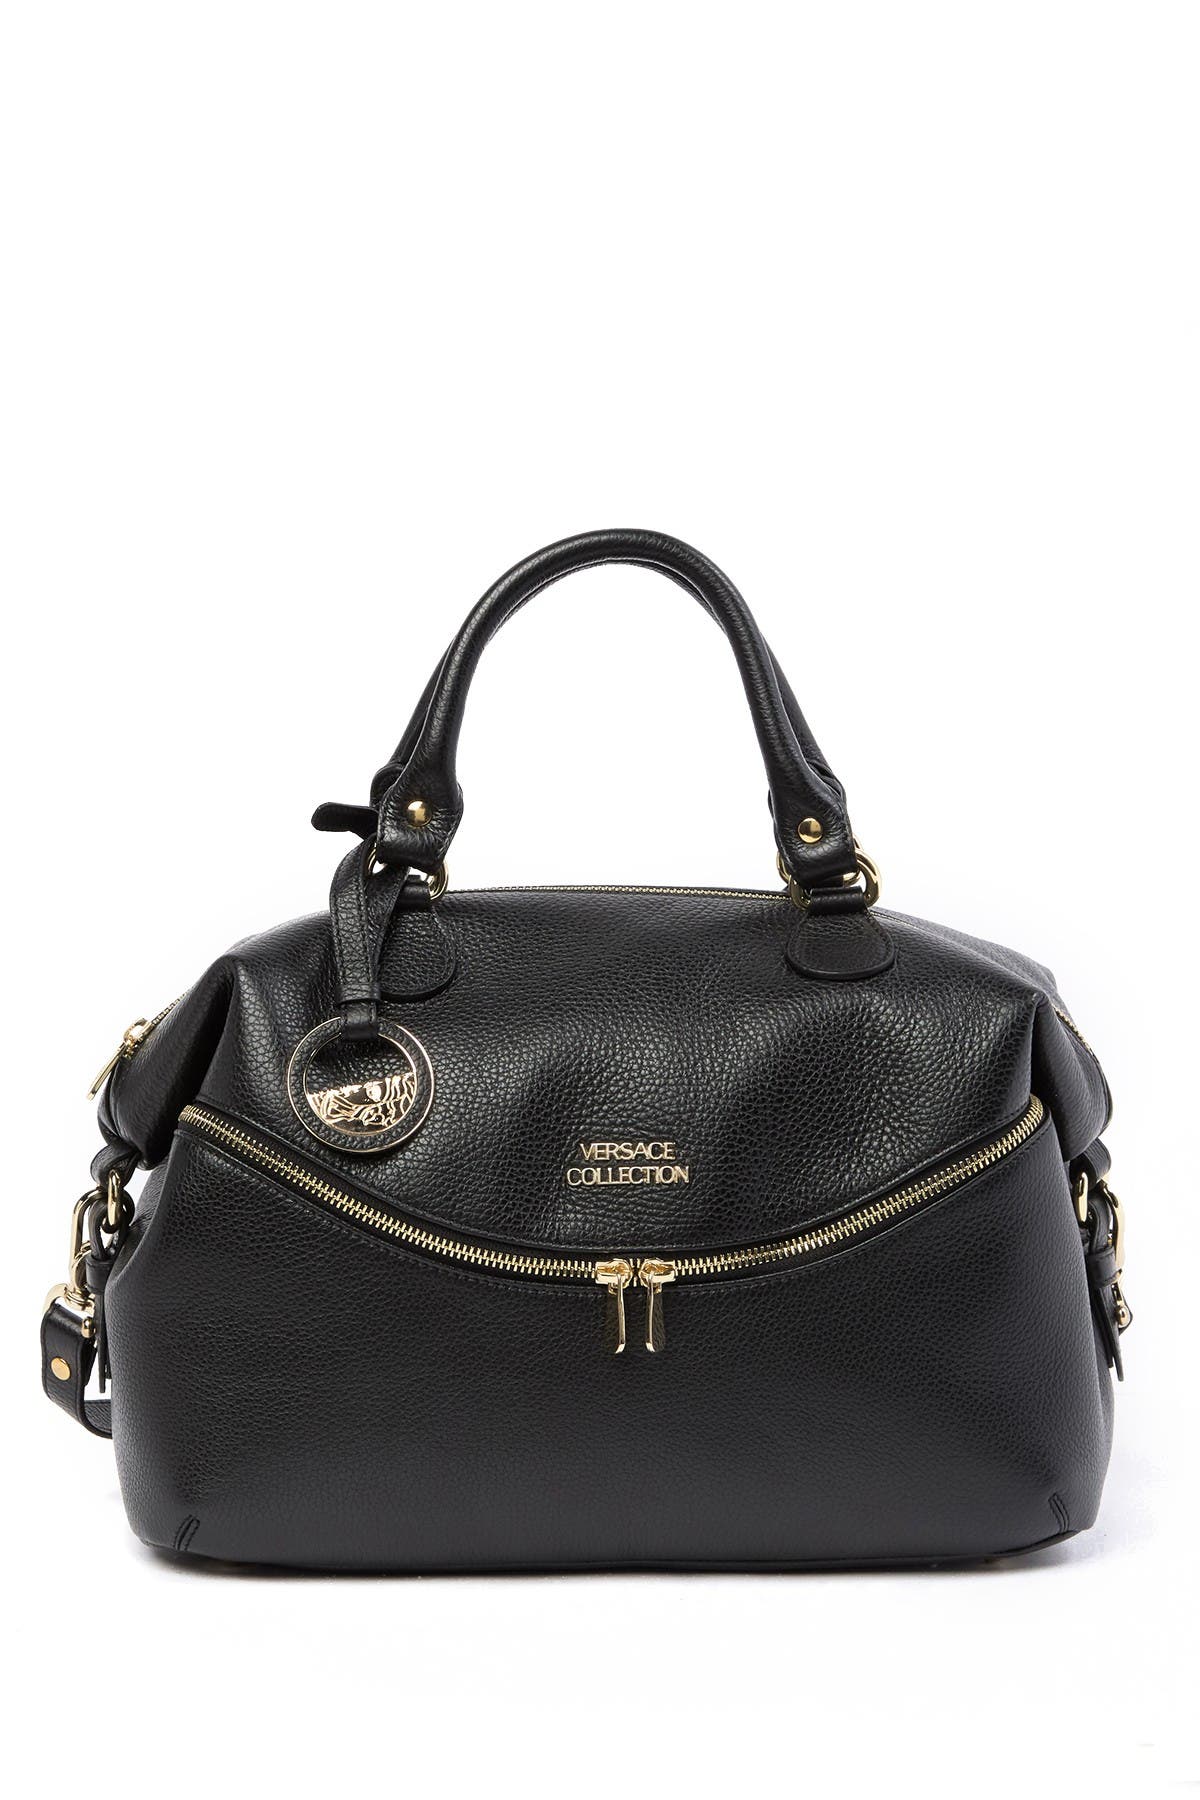 VERSACE COLLECTION | Leather Satchel 